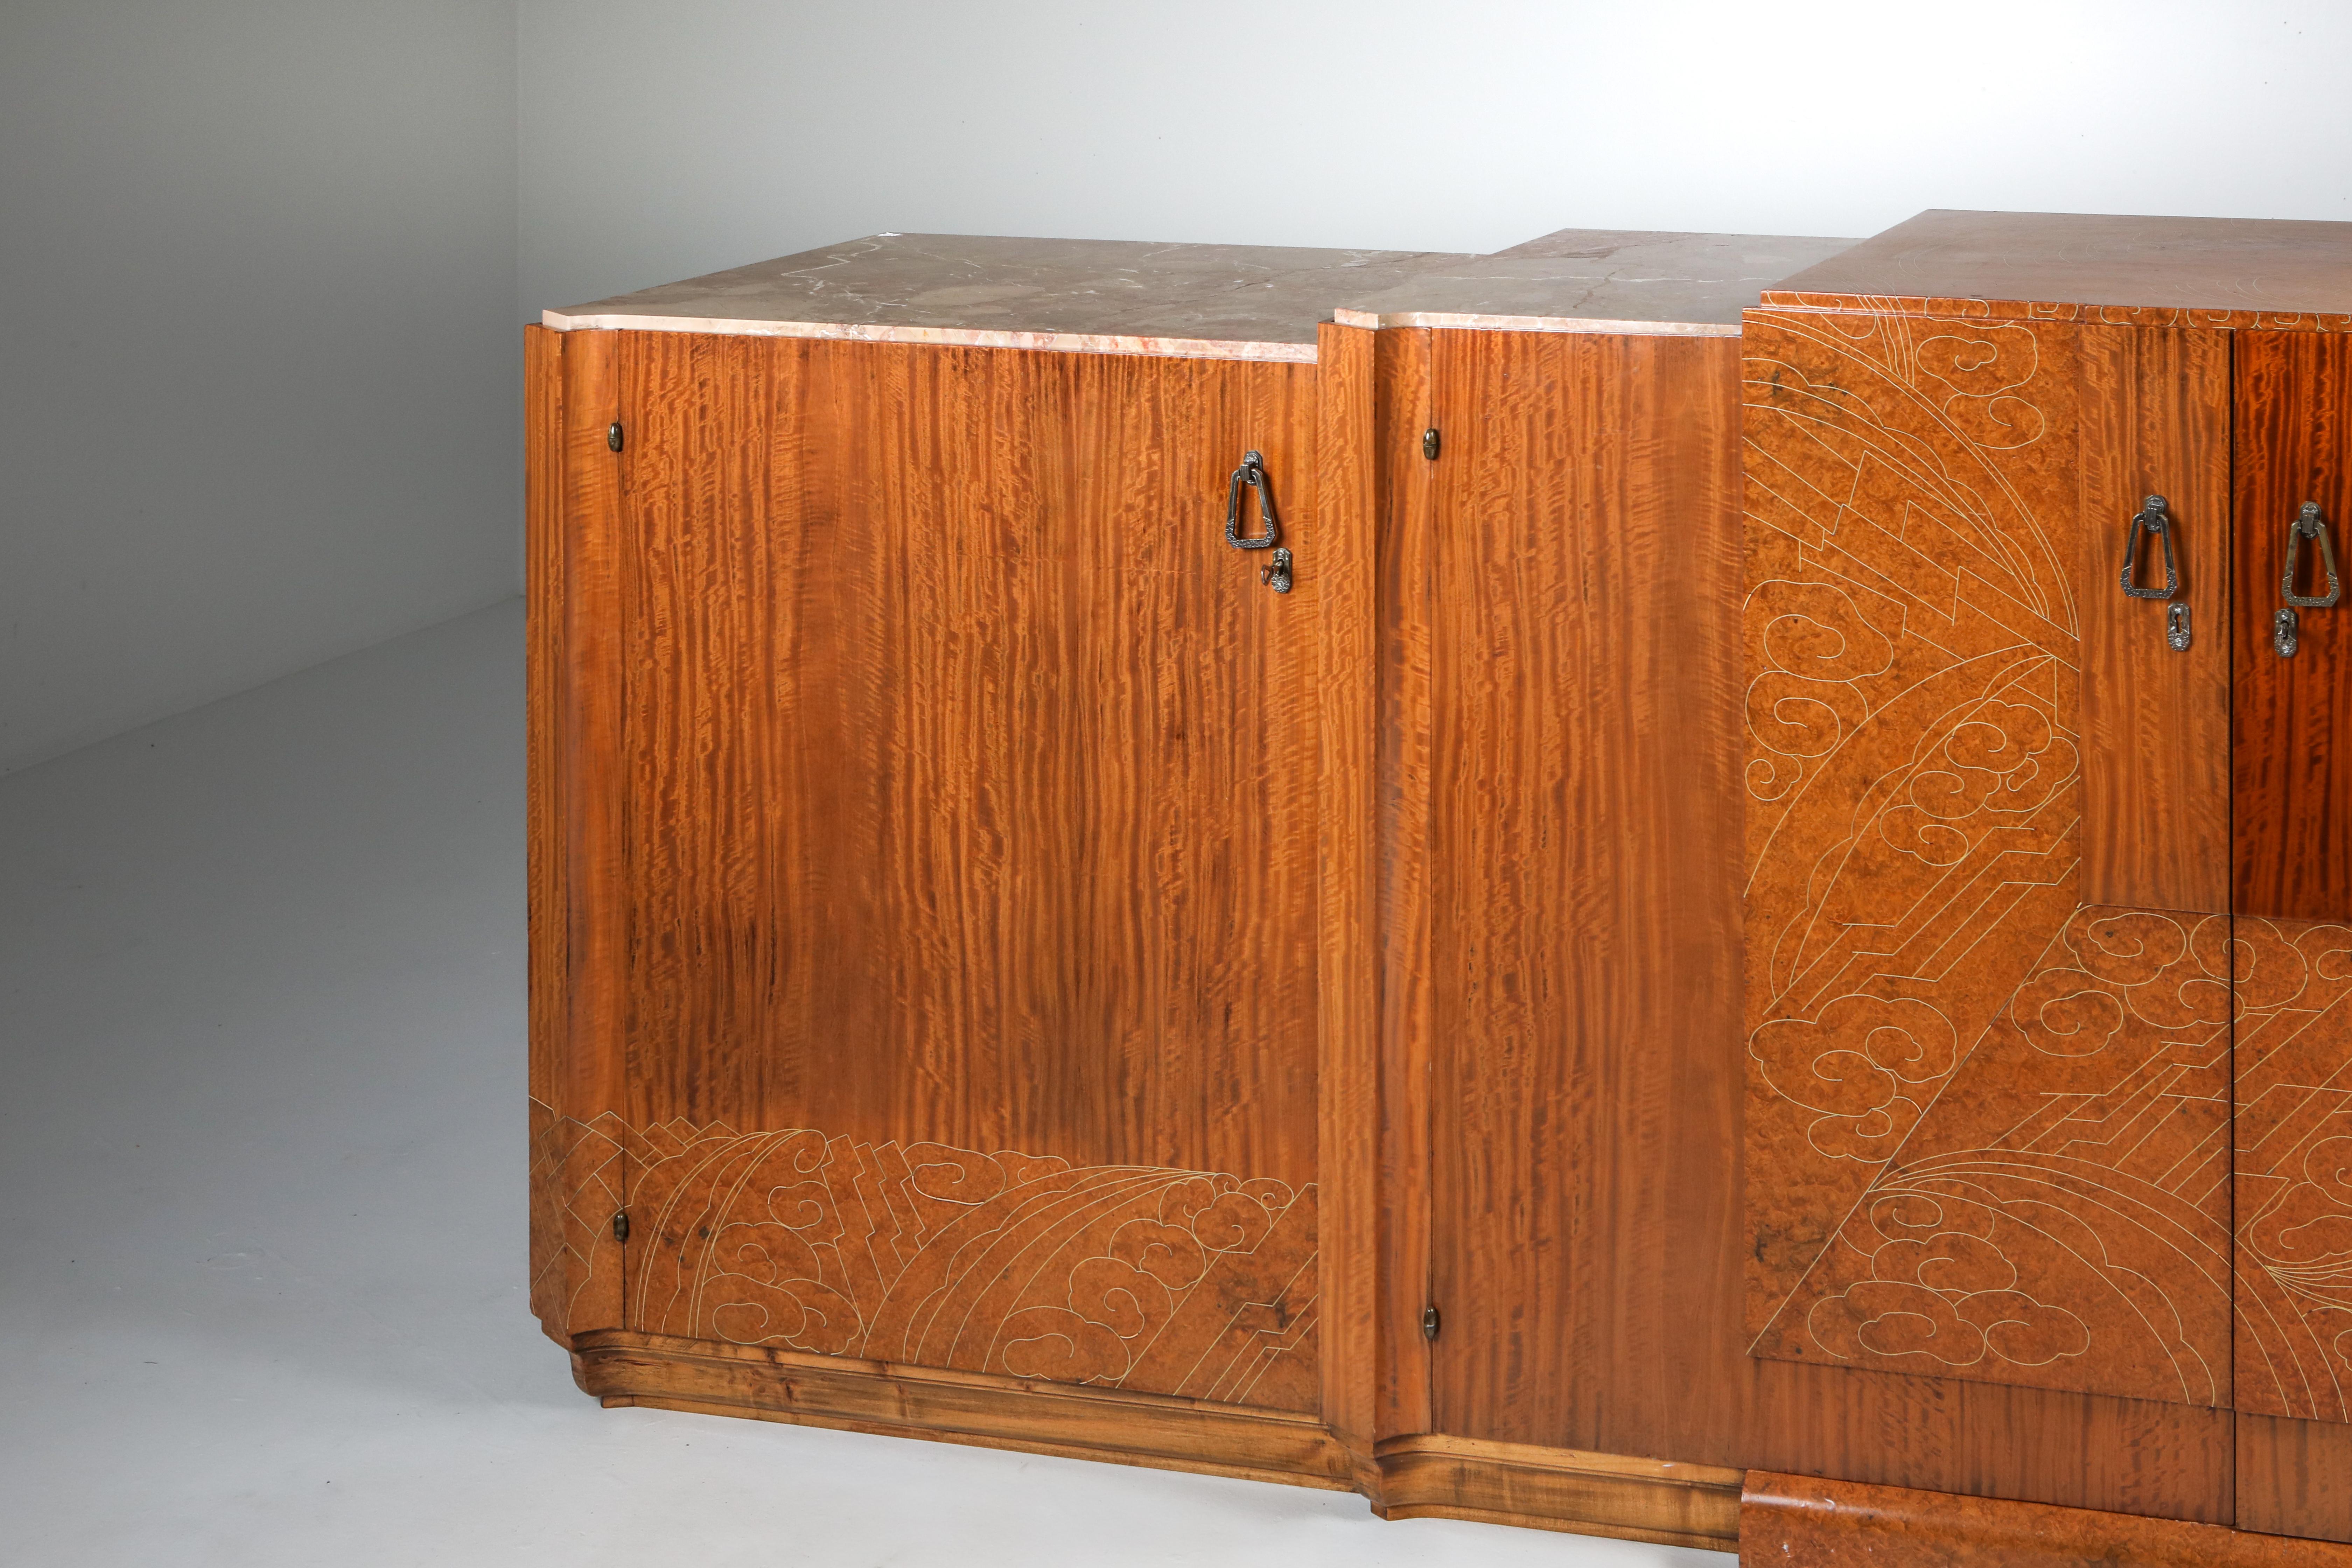 Art Deco High-End Credenza, Mahogany, Burl, Loupe D'amboine and Marble, 1930's For Sale 2